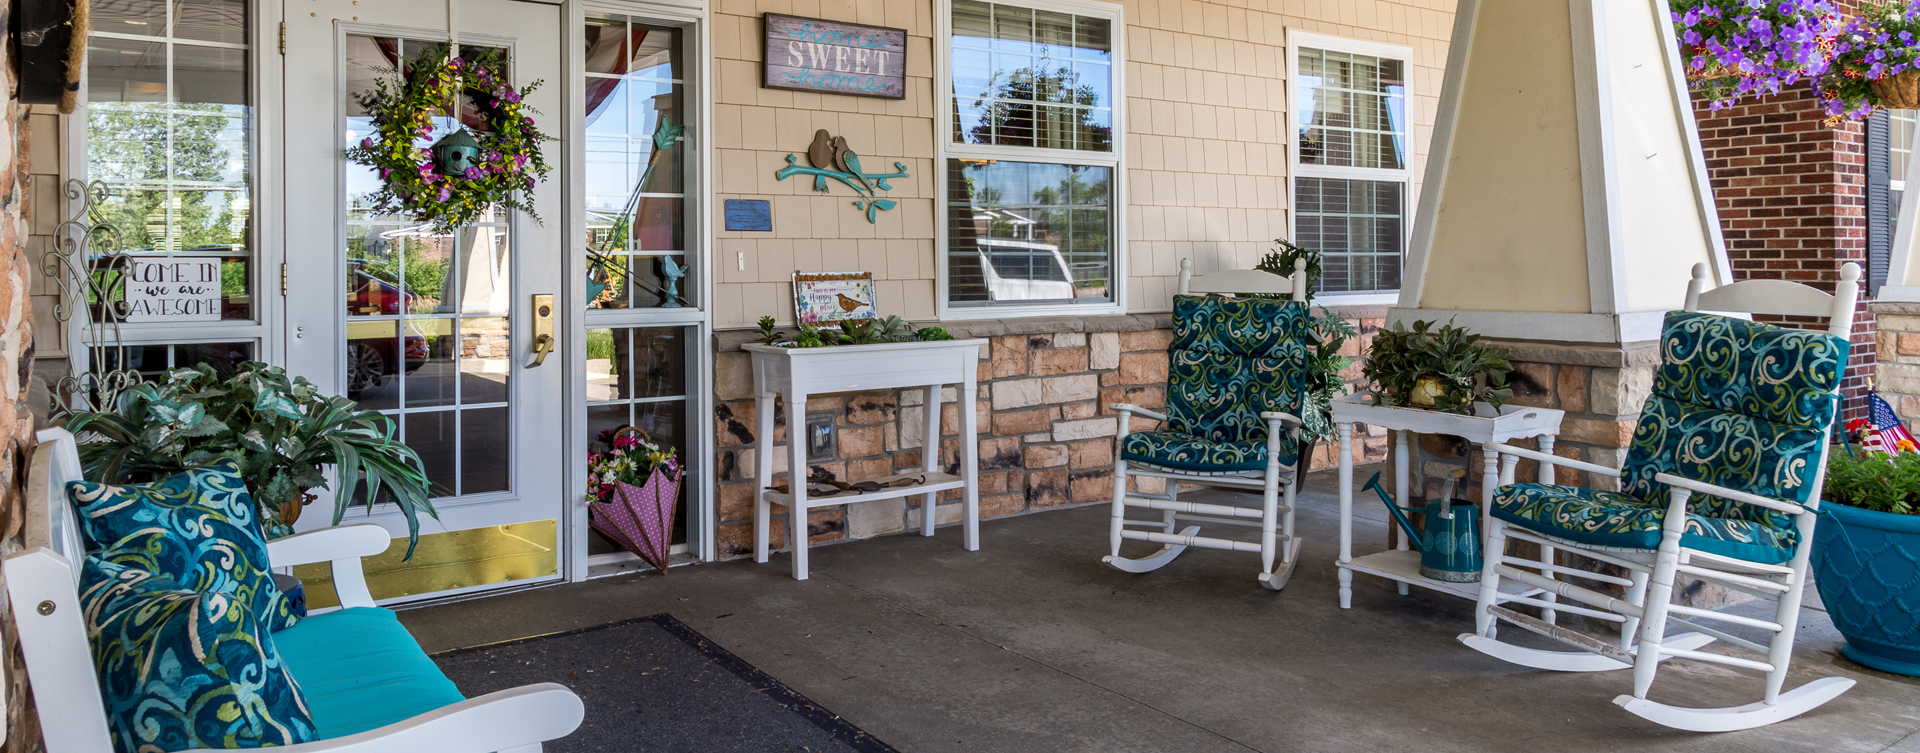 Enjoy conversations with friends on the porch at Bickford of Okemos